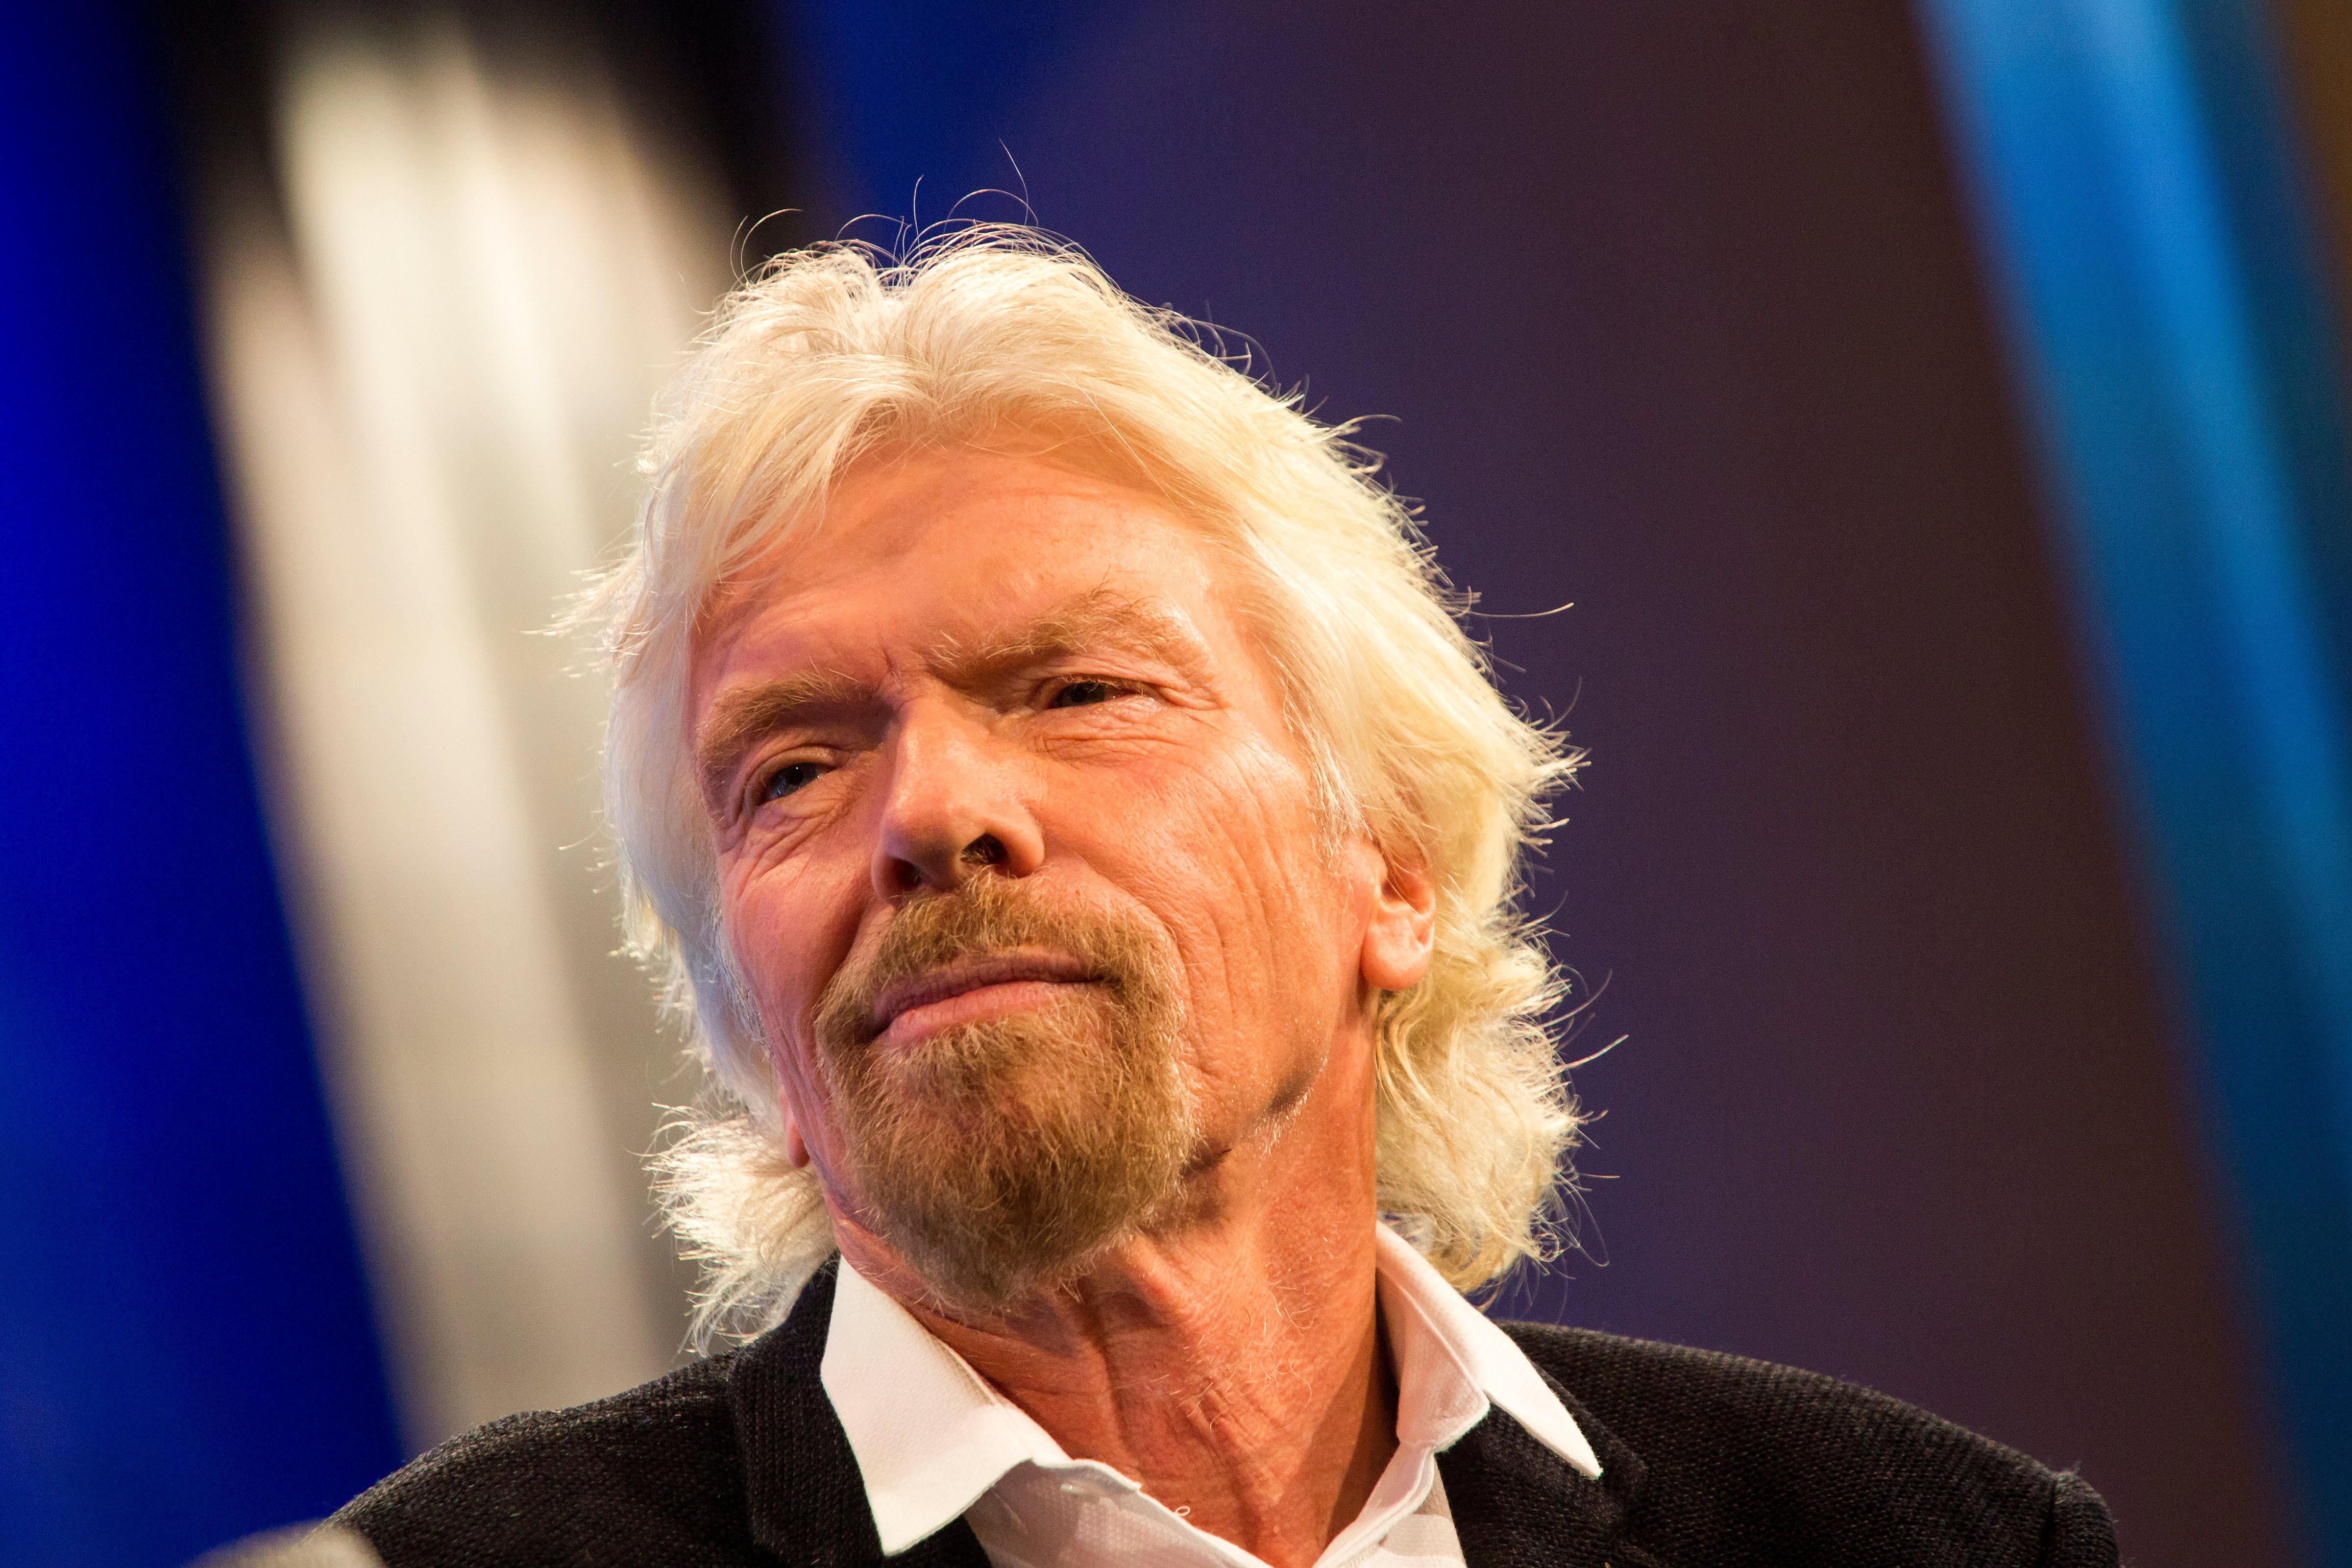 Richard Branson, chairman and founder of Virgin Group Ltd., at the annual Clinton Global Initiative (CGI) meeting in New York City on Sept. 28, 2015.